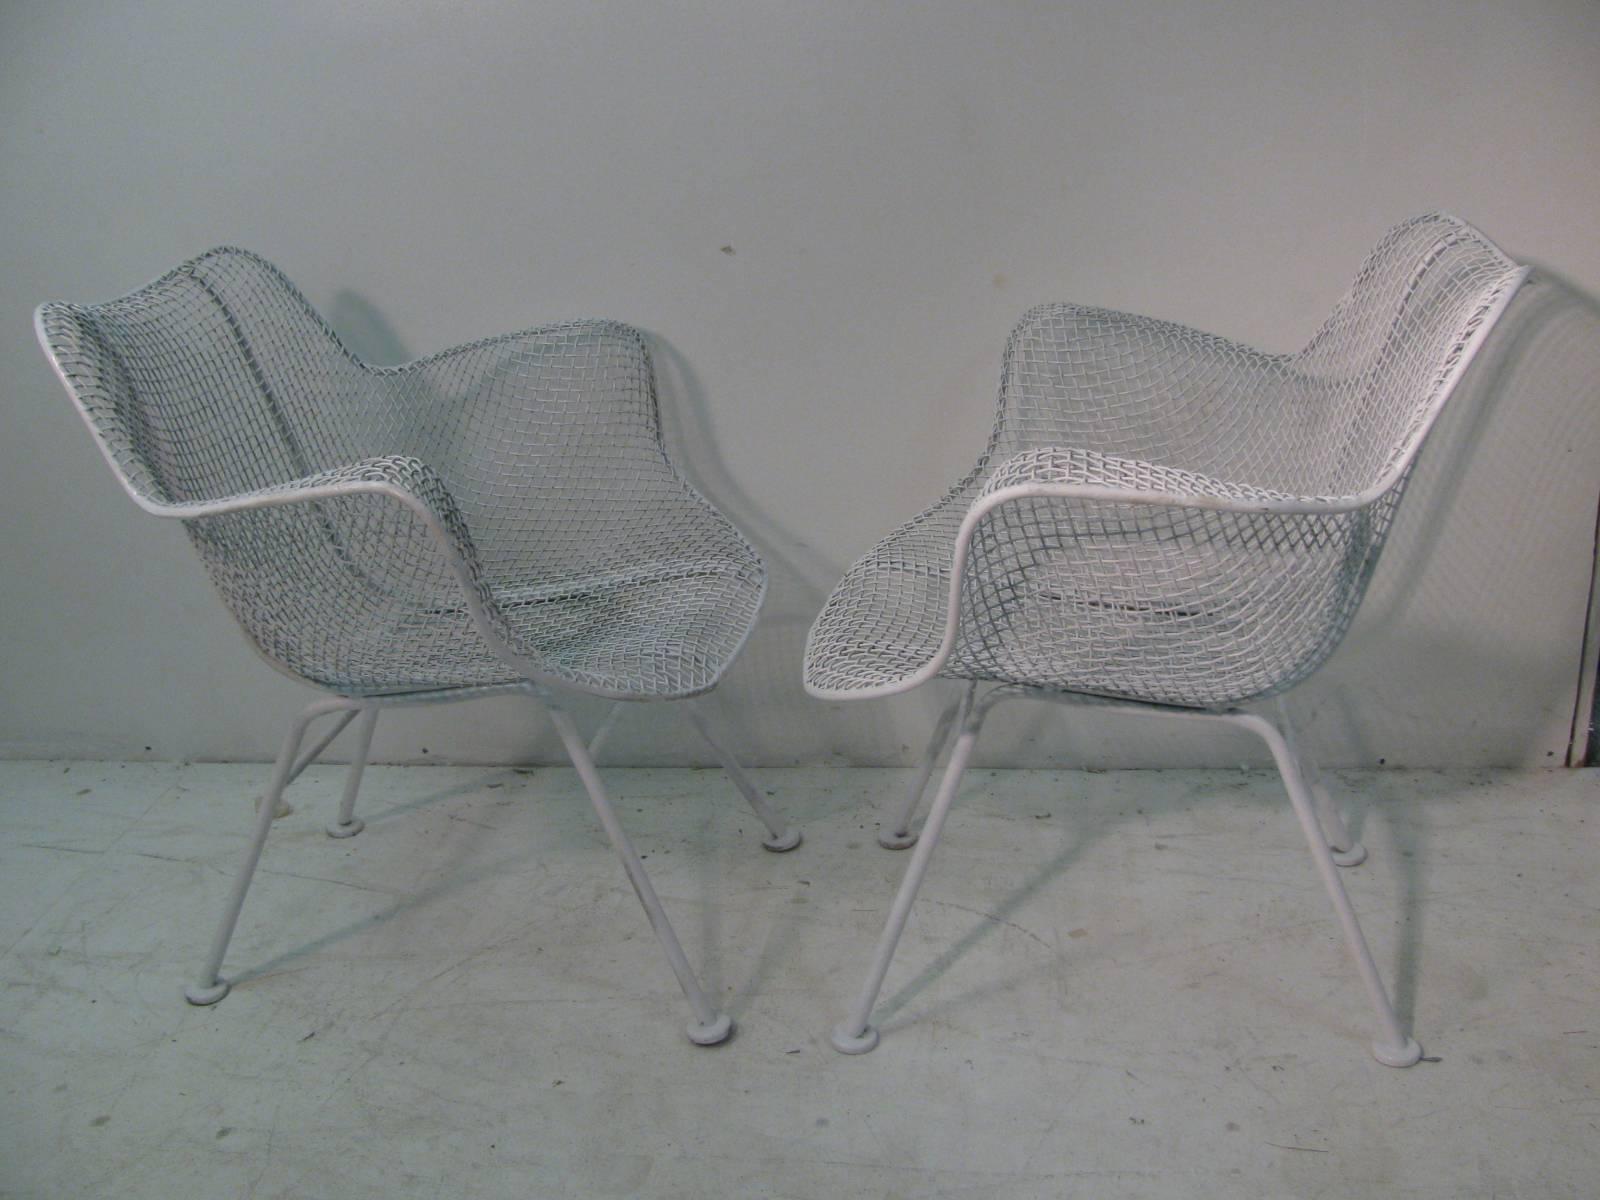 Simple and elegant wire mesh chairs. Classic timeless beauties. Set of six which have been recently coated. Outdoor dining table is in another listing. All inquiries please call or just press “Contact Dealer” button.